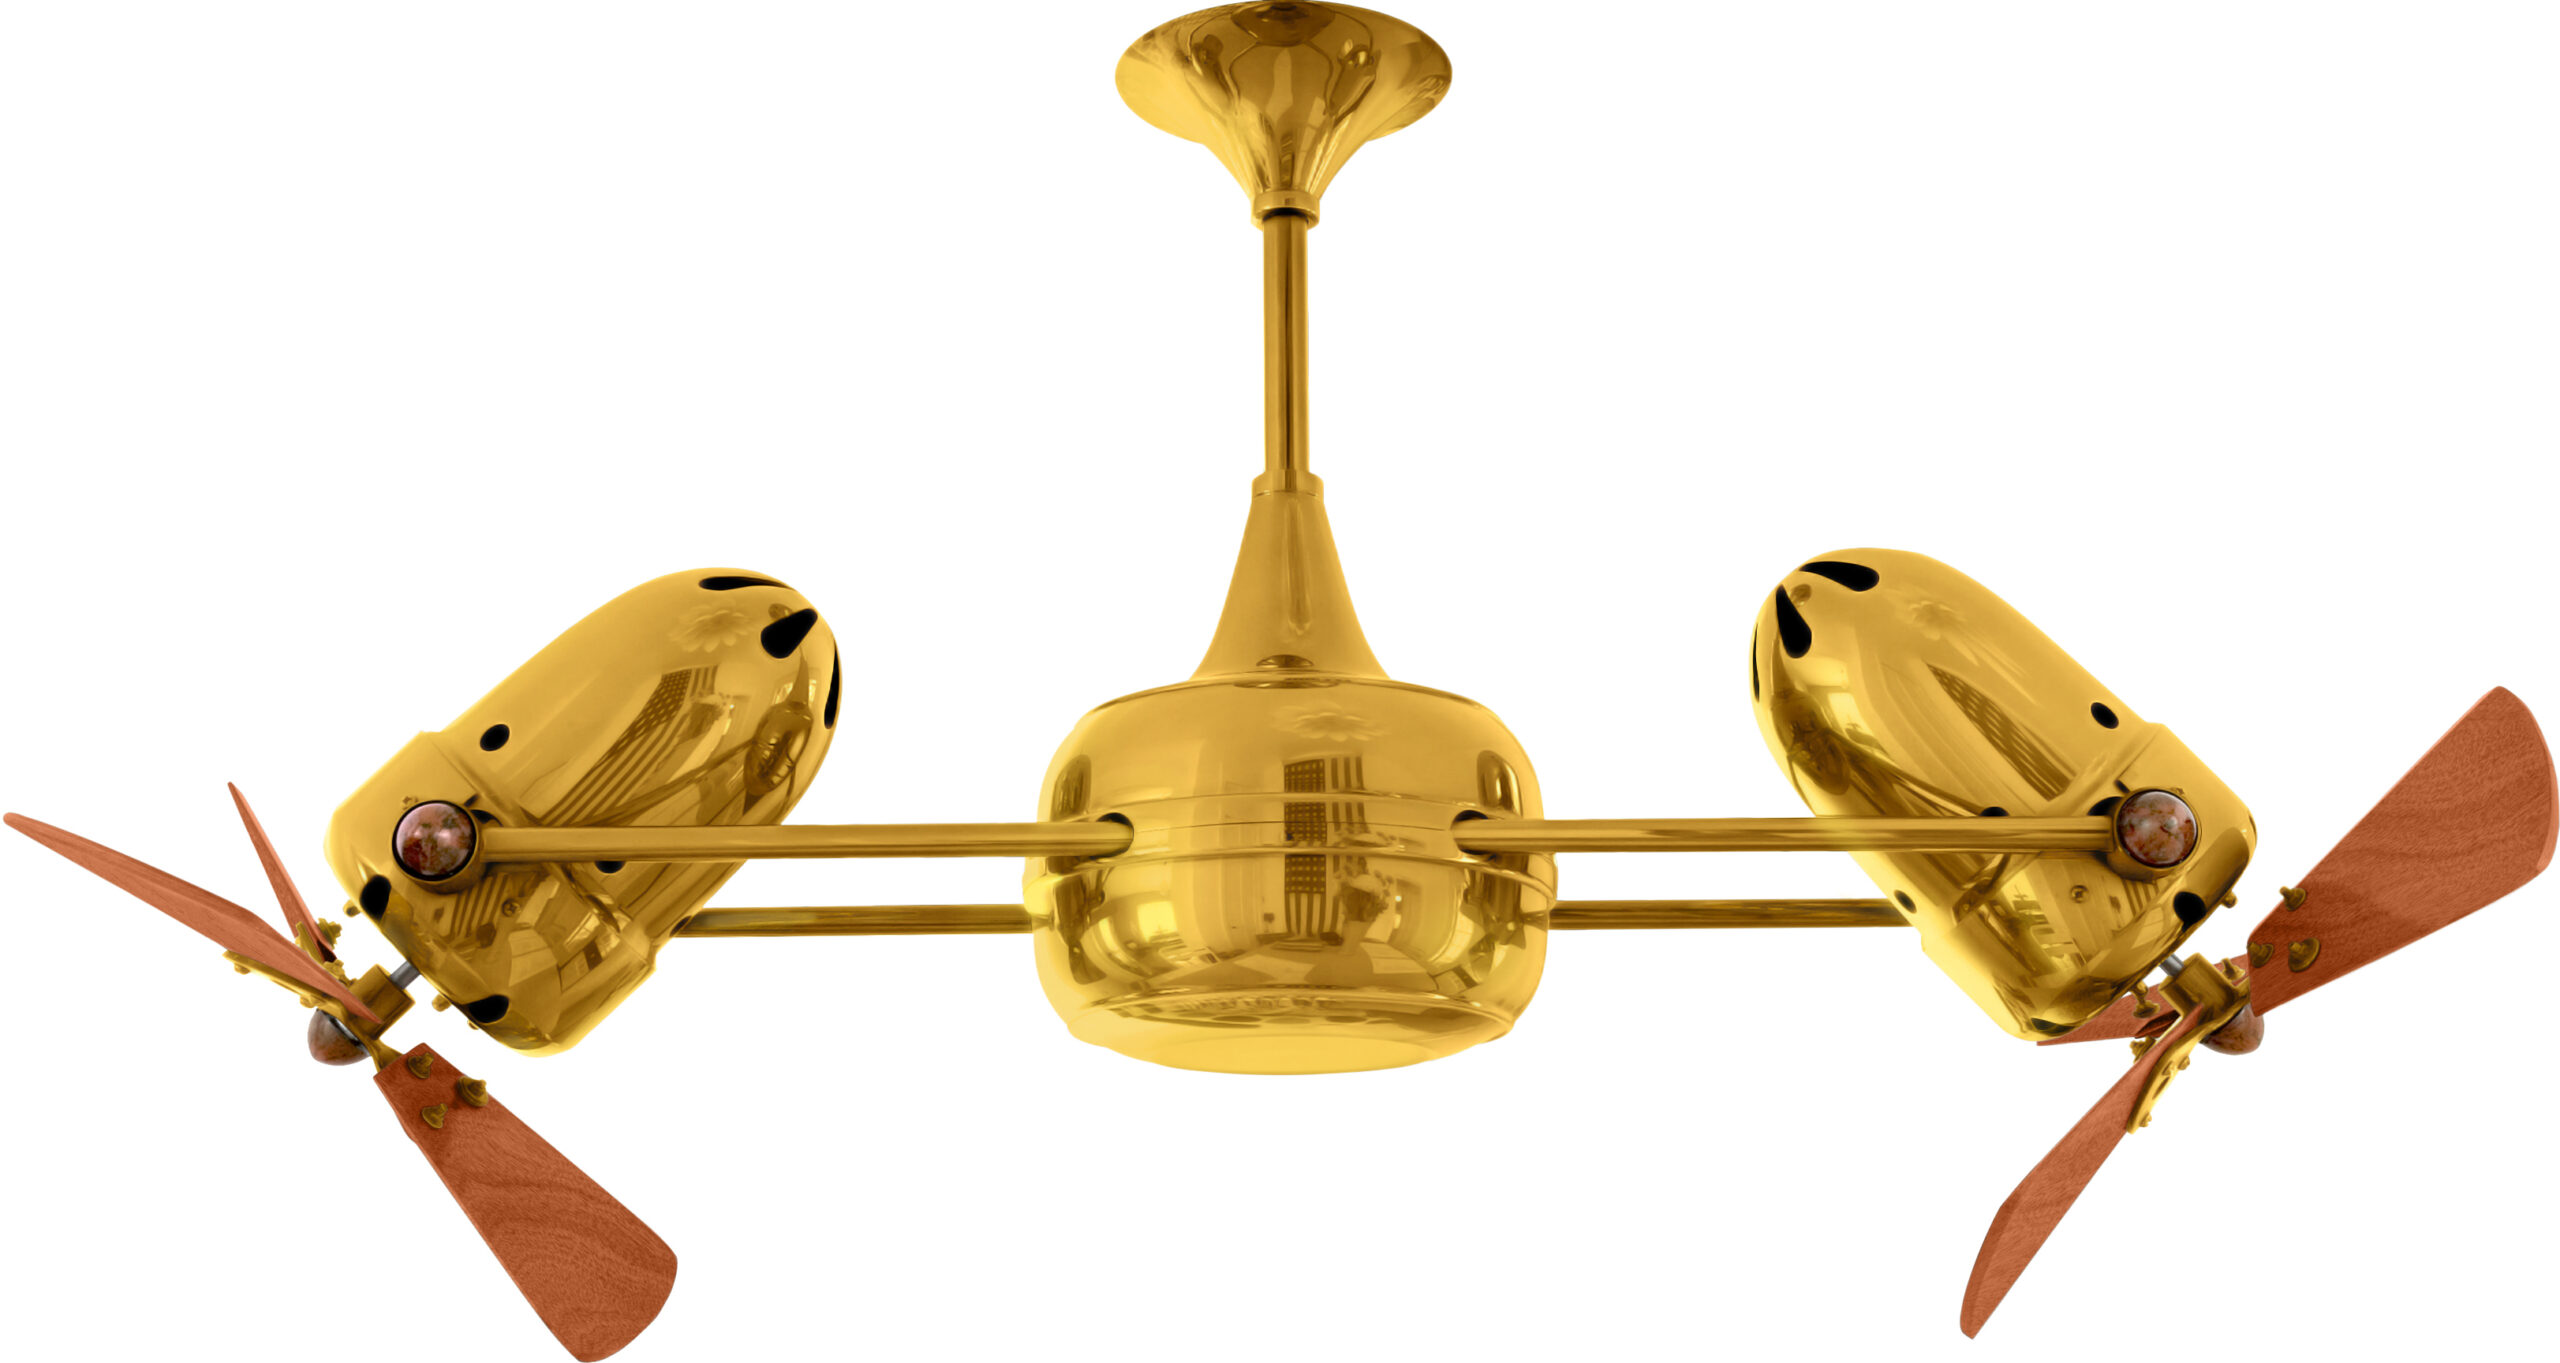 Duplo Dinamico rotational dual head ceiling fan in gold / ouro finish with solid mahogany wood blades made by Matthews Fan Company.